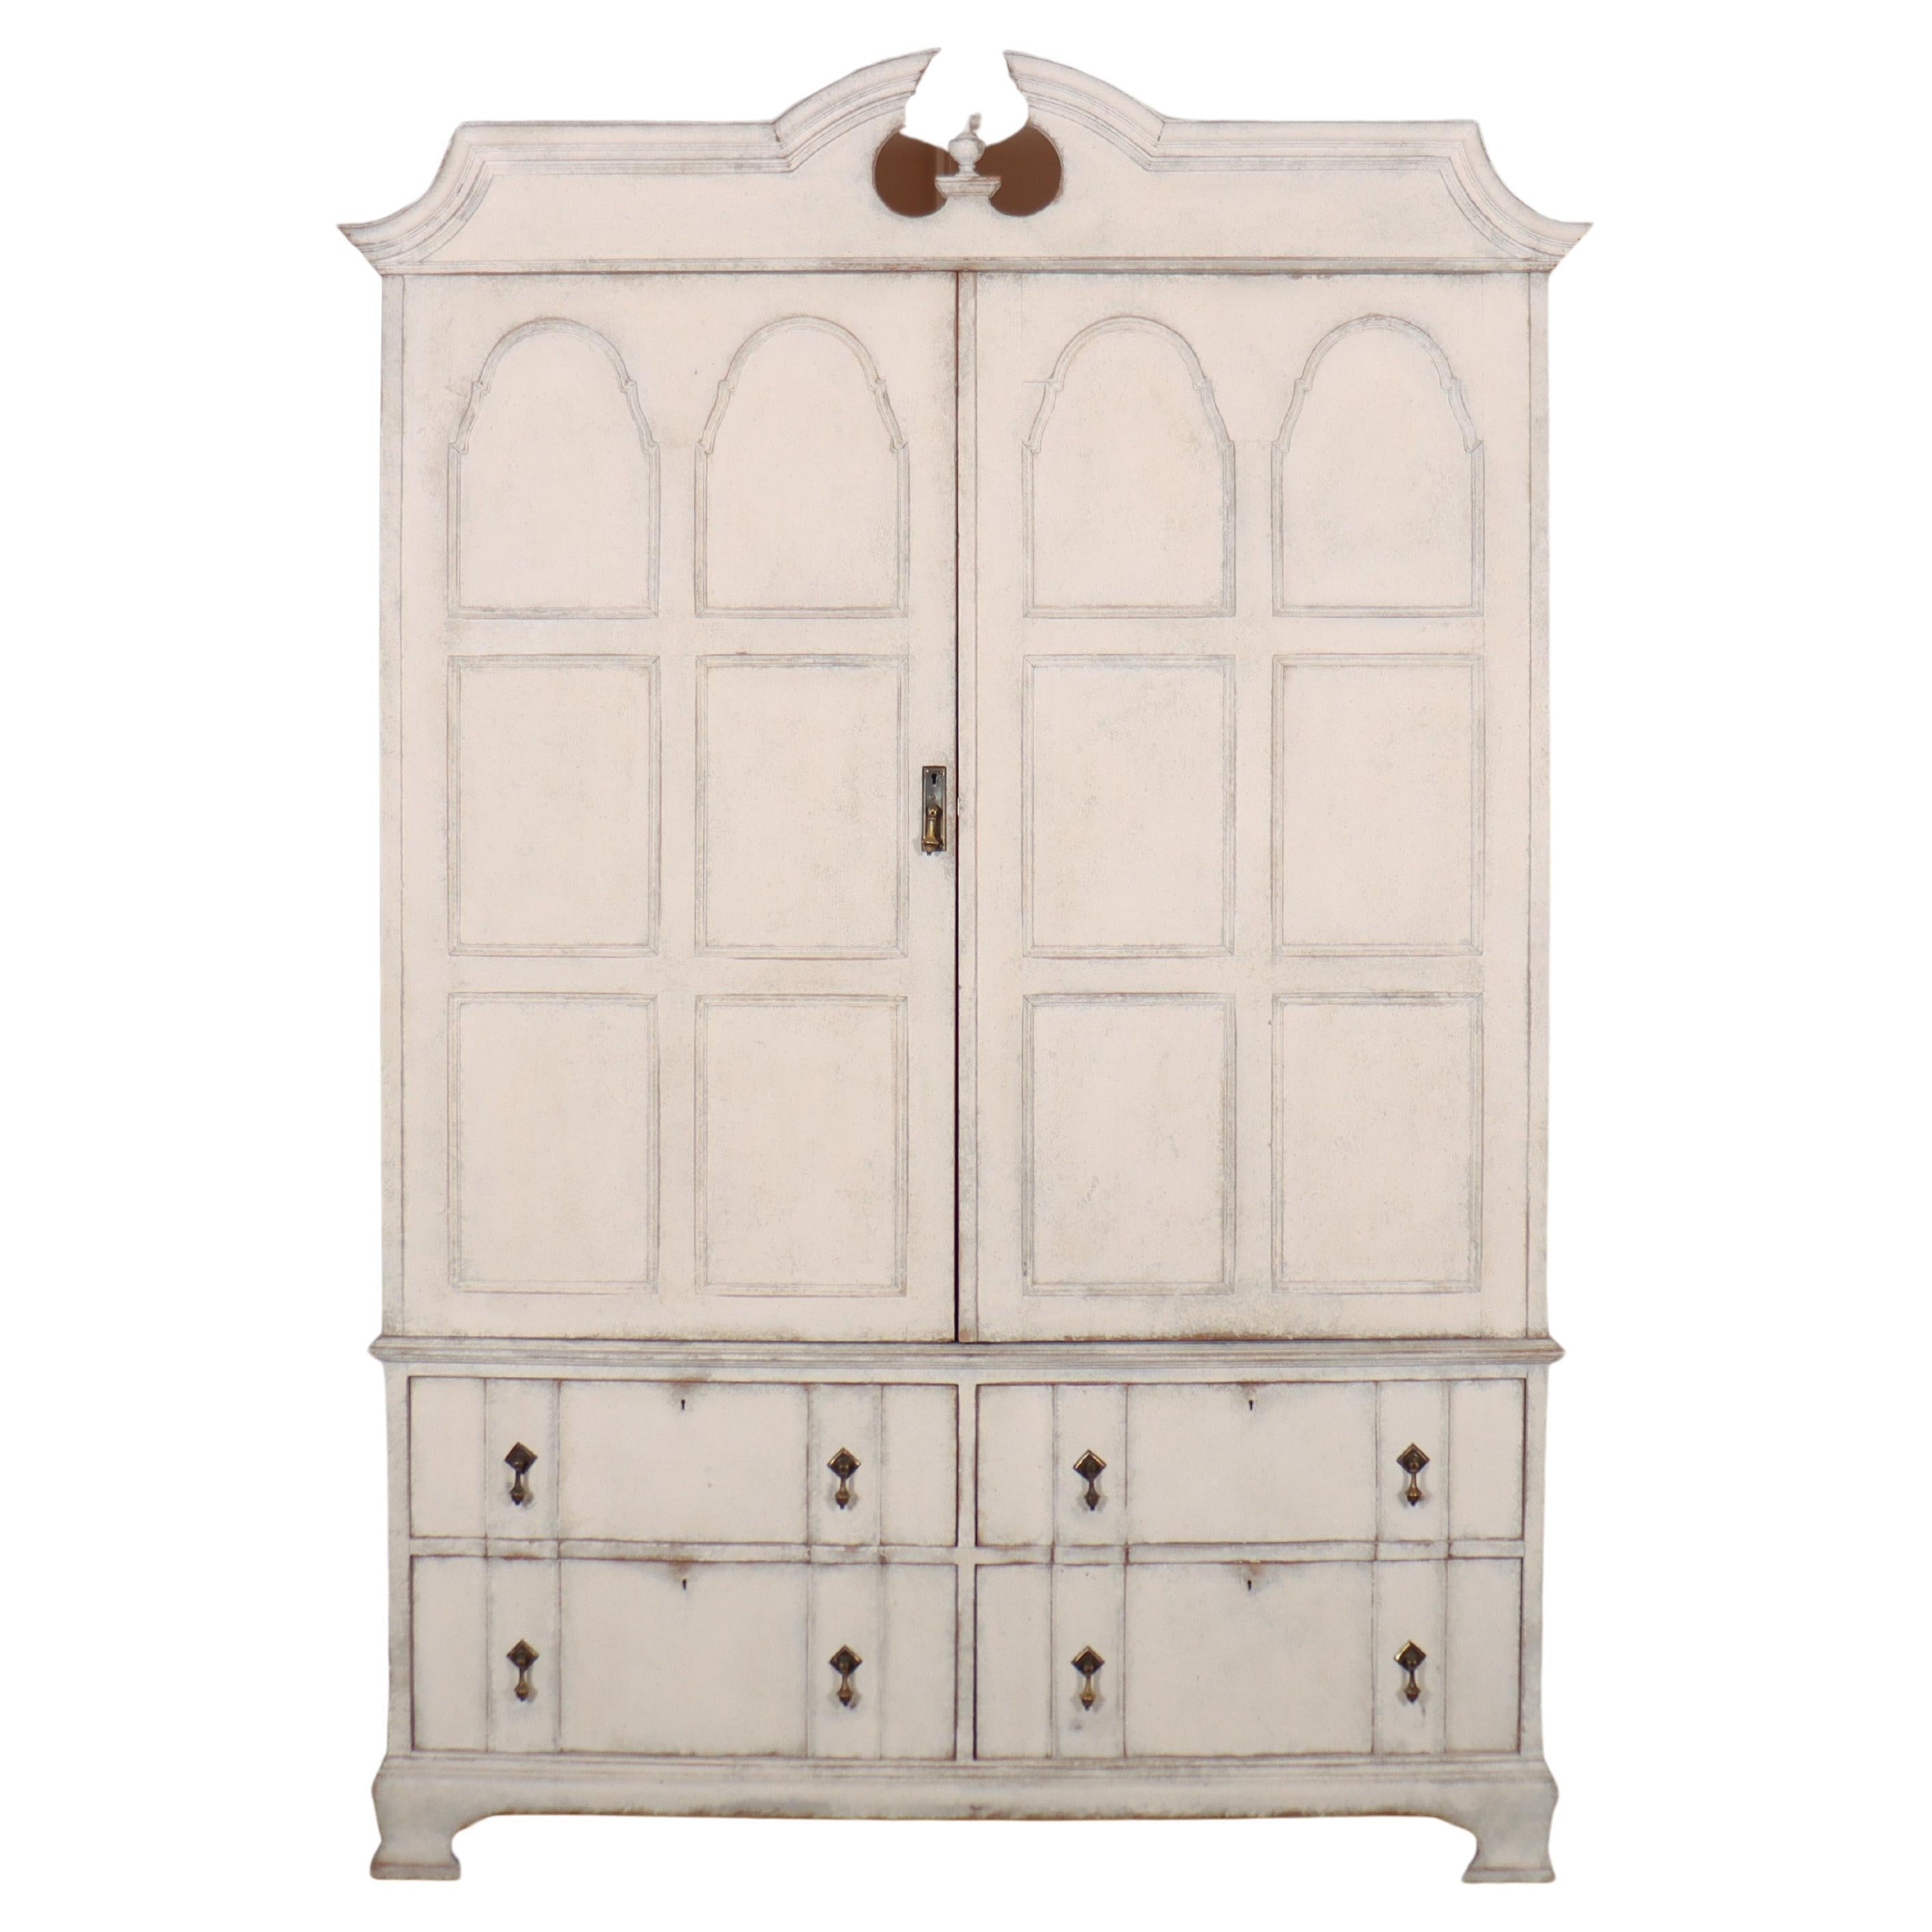 Dutch Painted Wardrobe For Sale